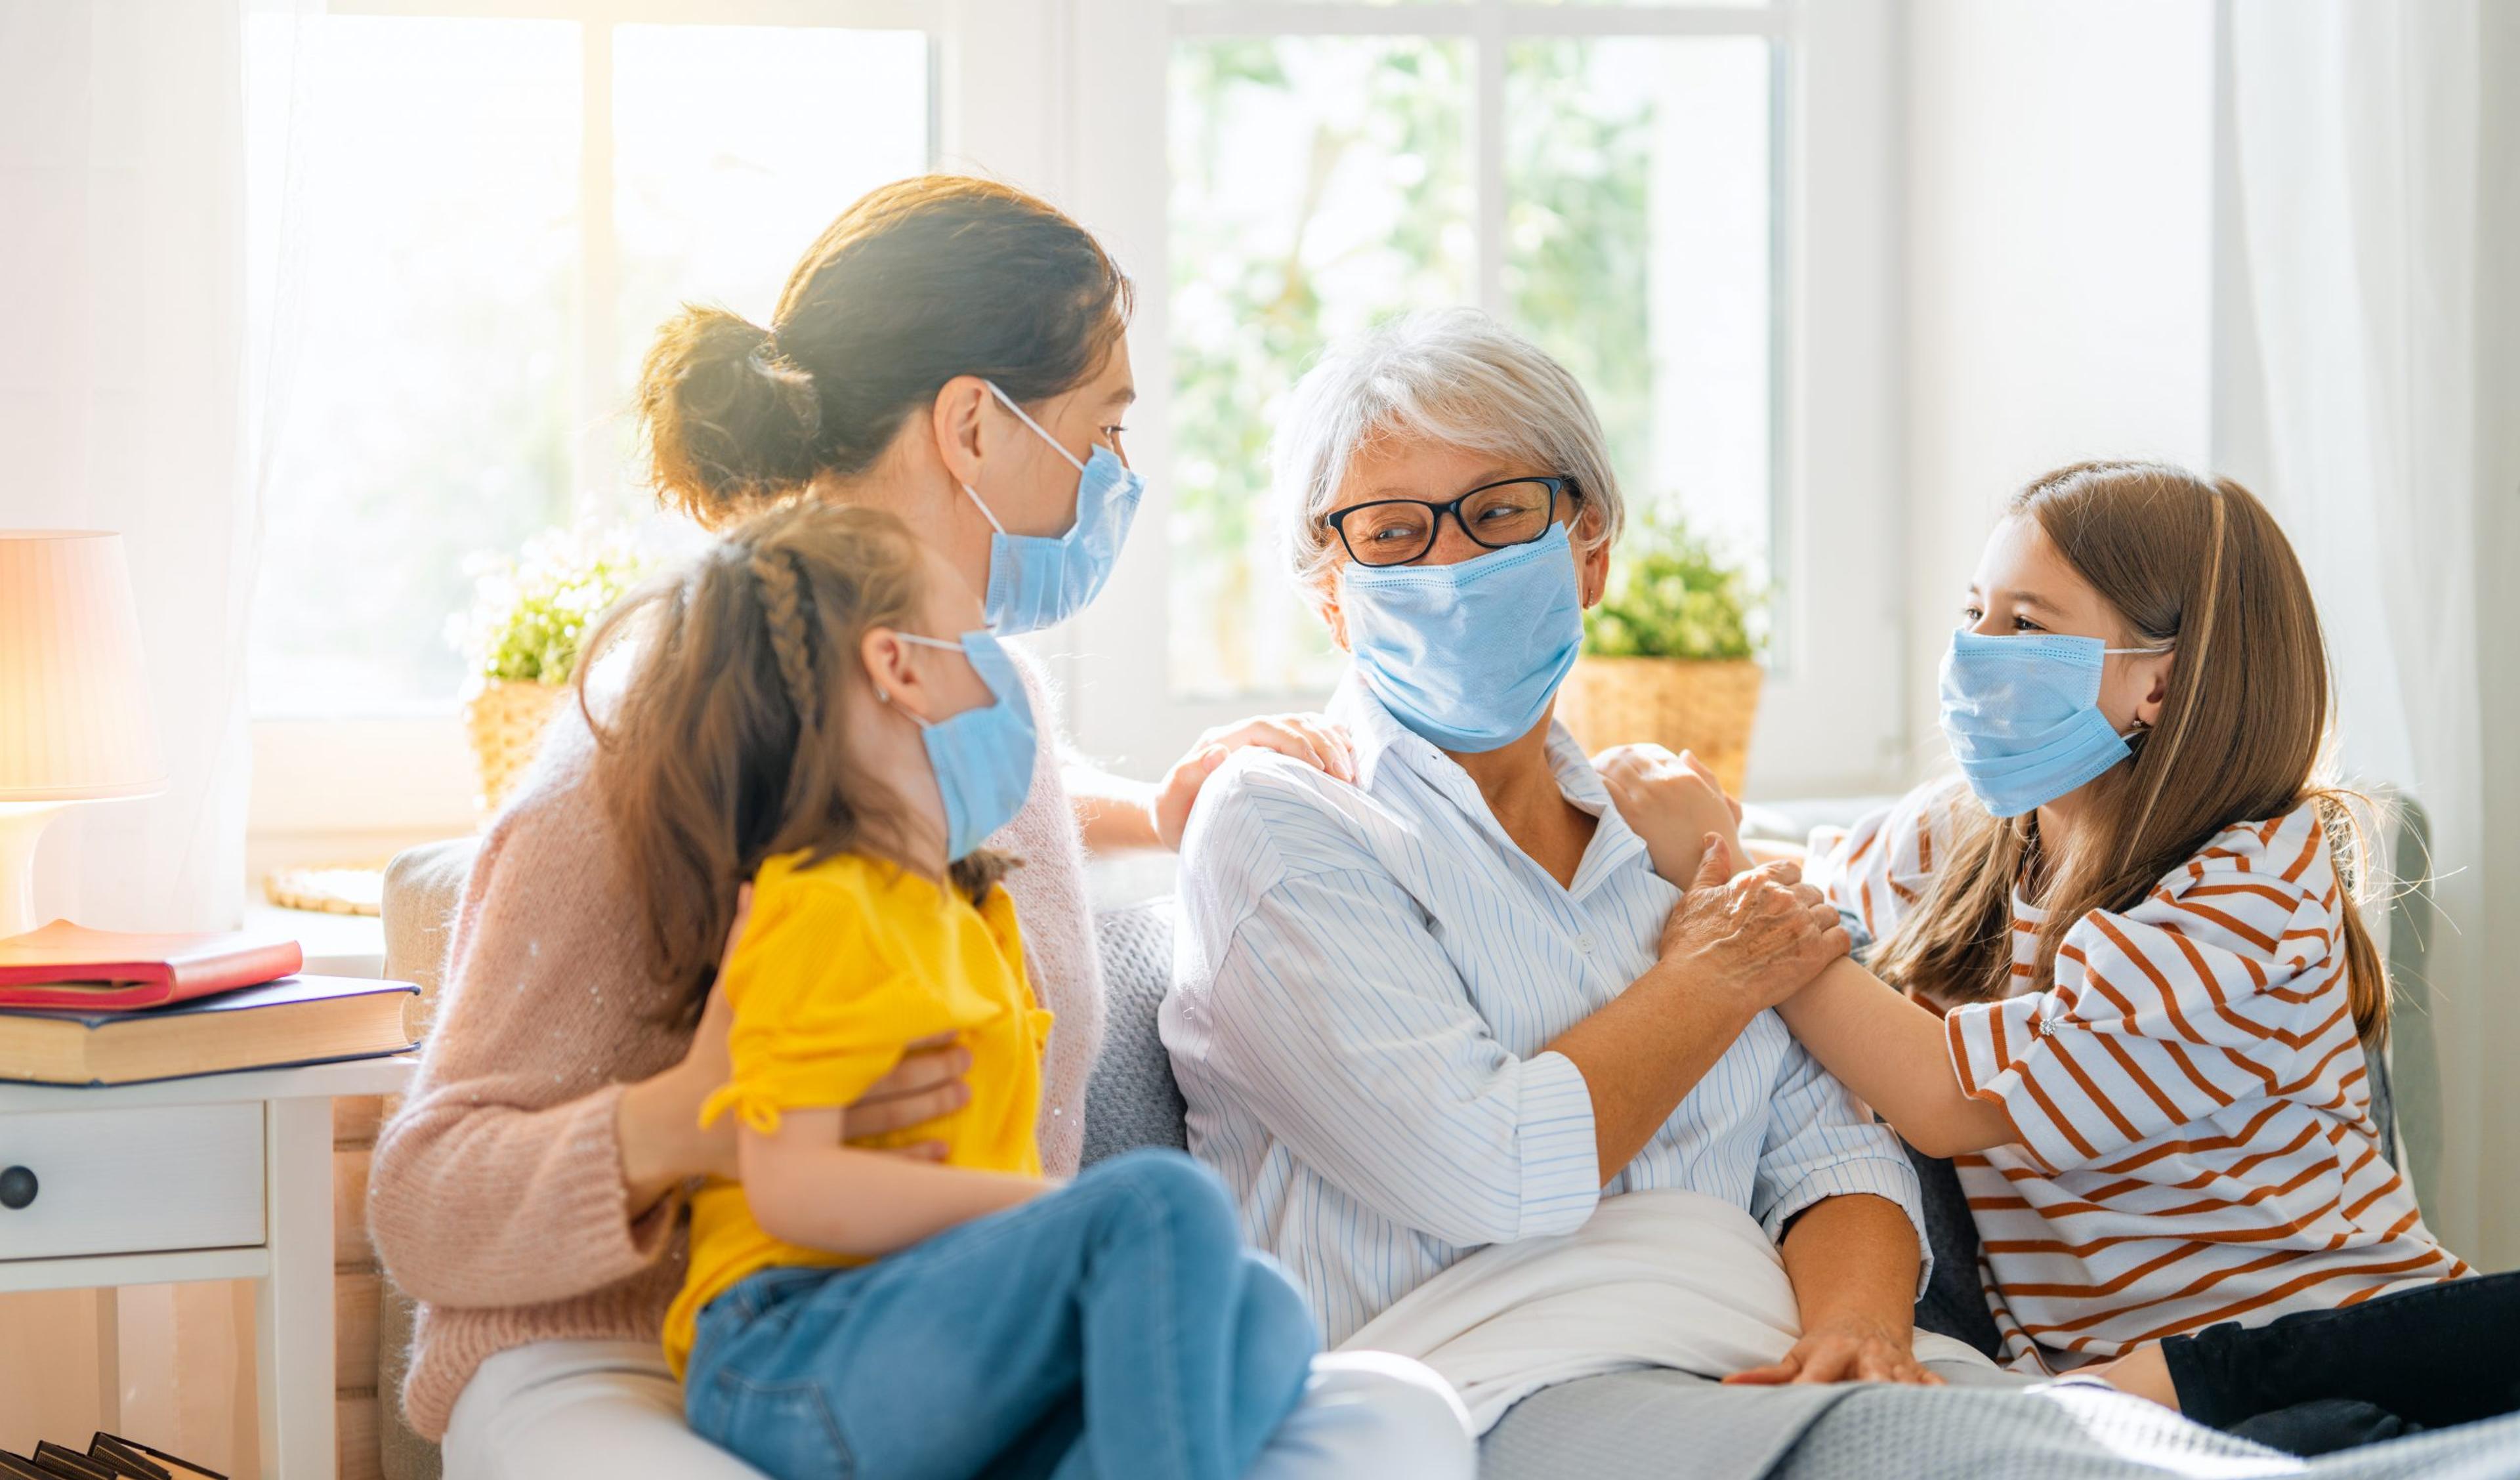 Grandmother visiting with her daughter and grandchildren, all wearing masks